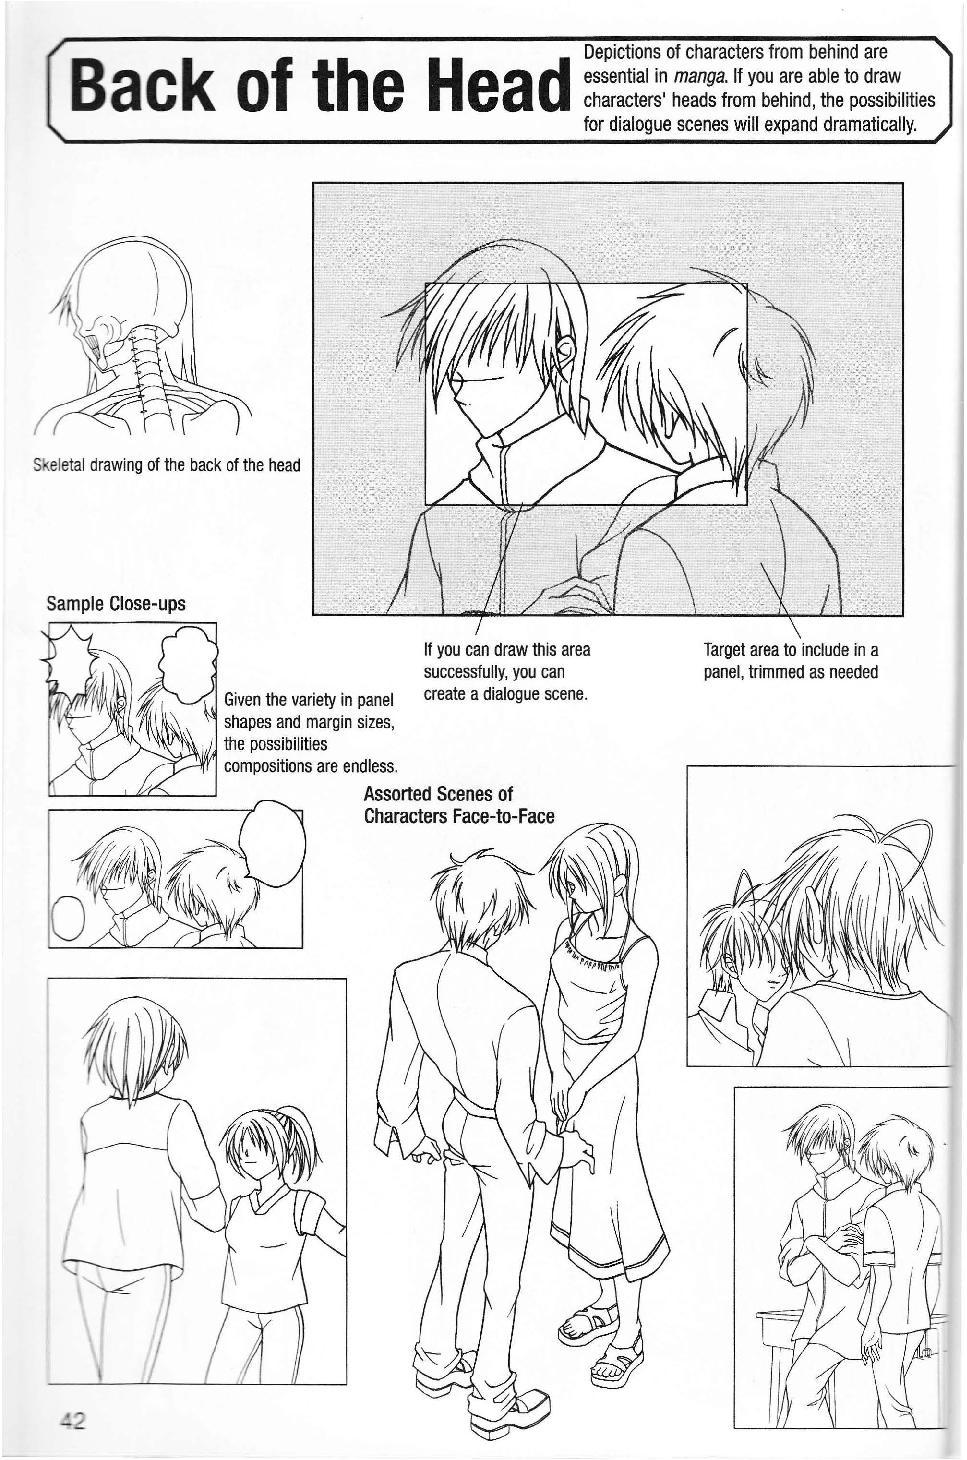 More How to Draw Manga Vol. 2 - Penning Characters 43